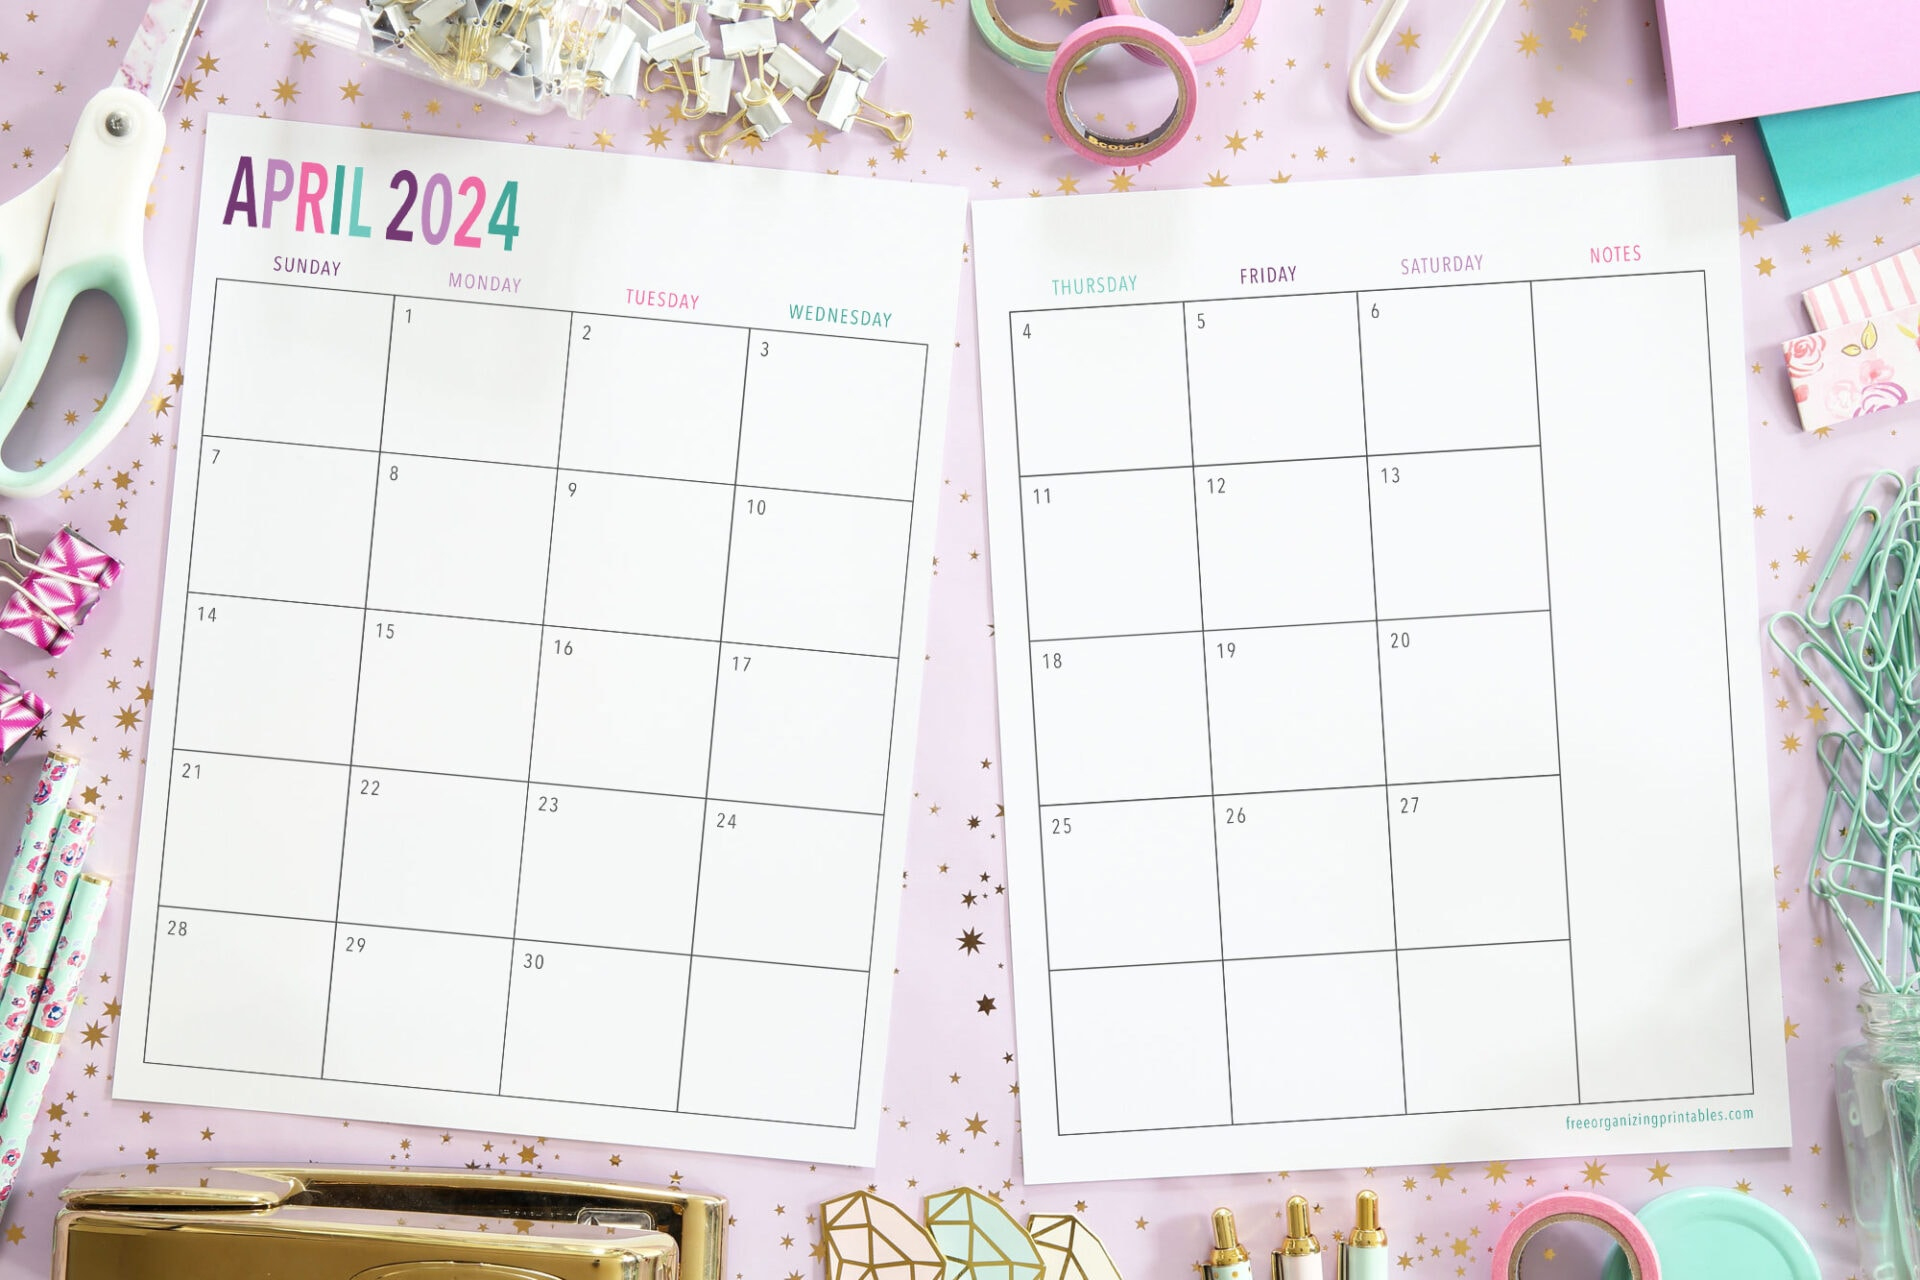 Free Printable 2 Page Blank Monthly Calendar 2024 | Free 2024 Monthly Calendar Printable Free